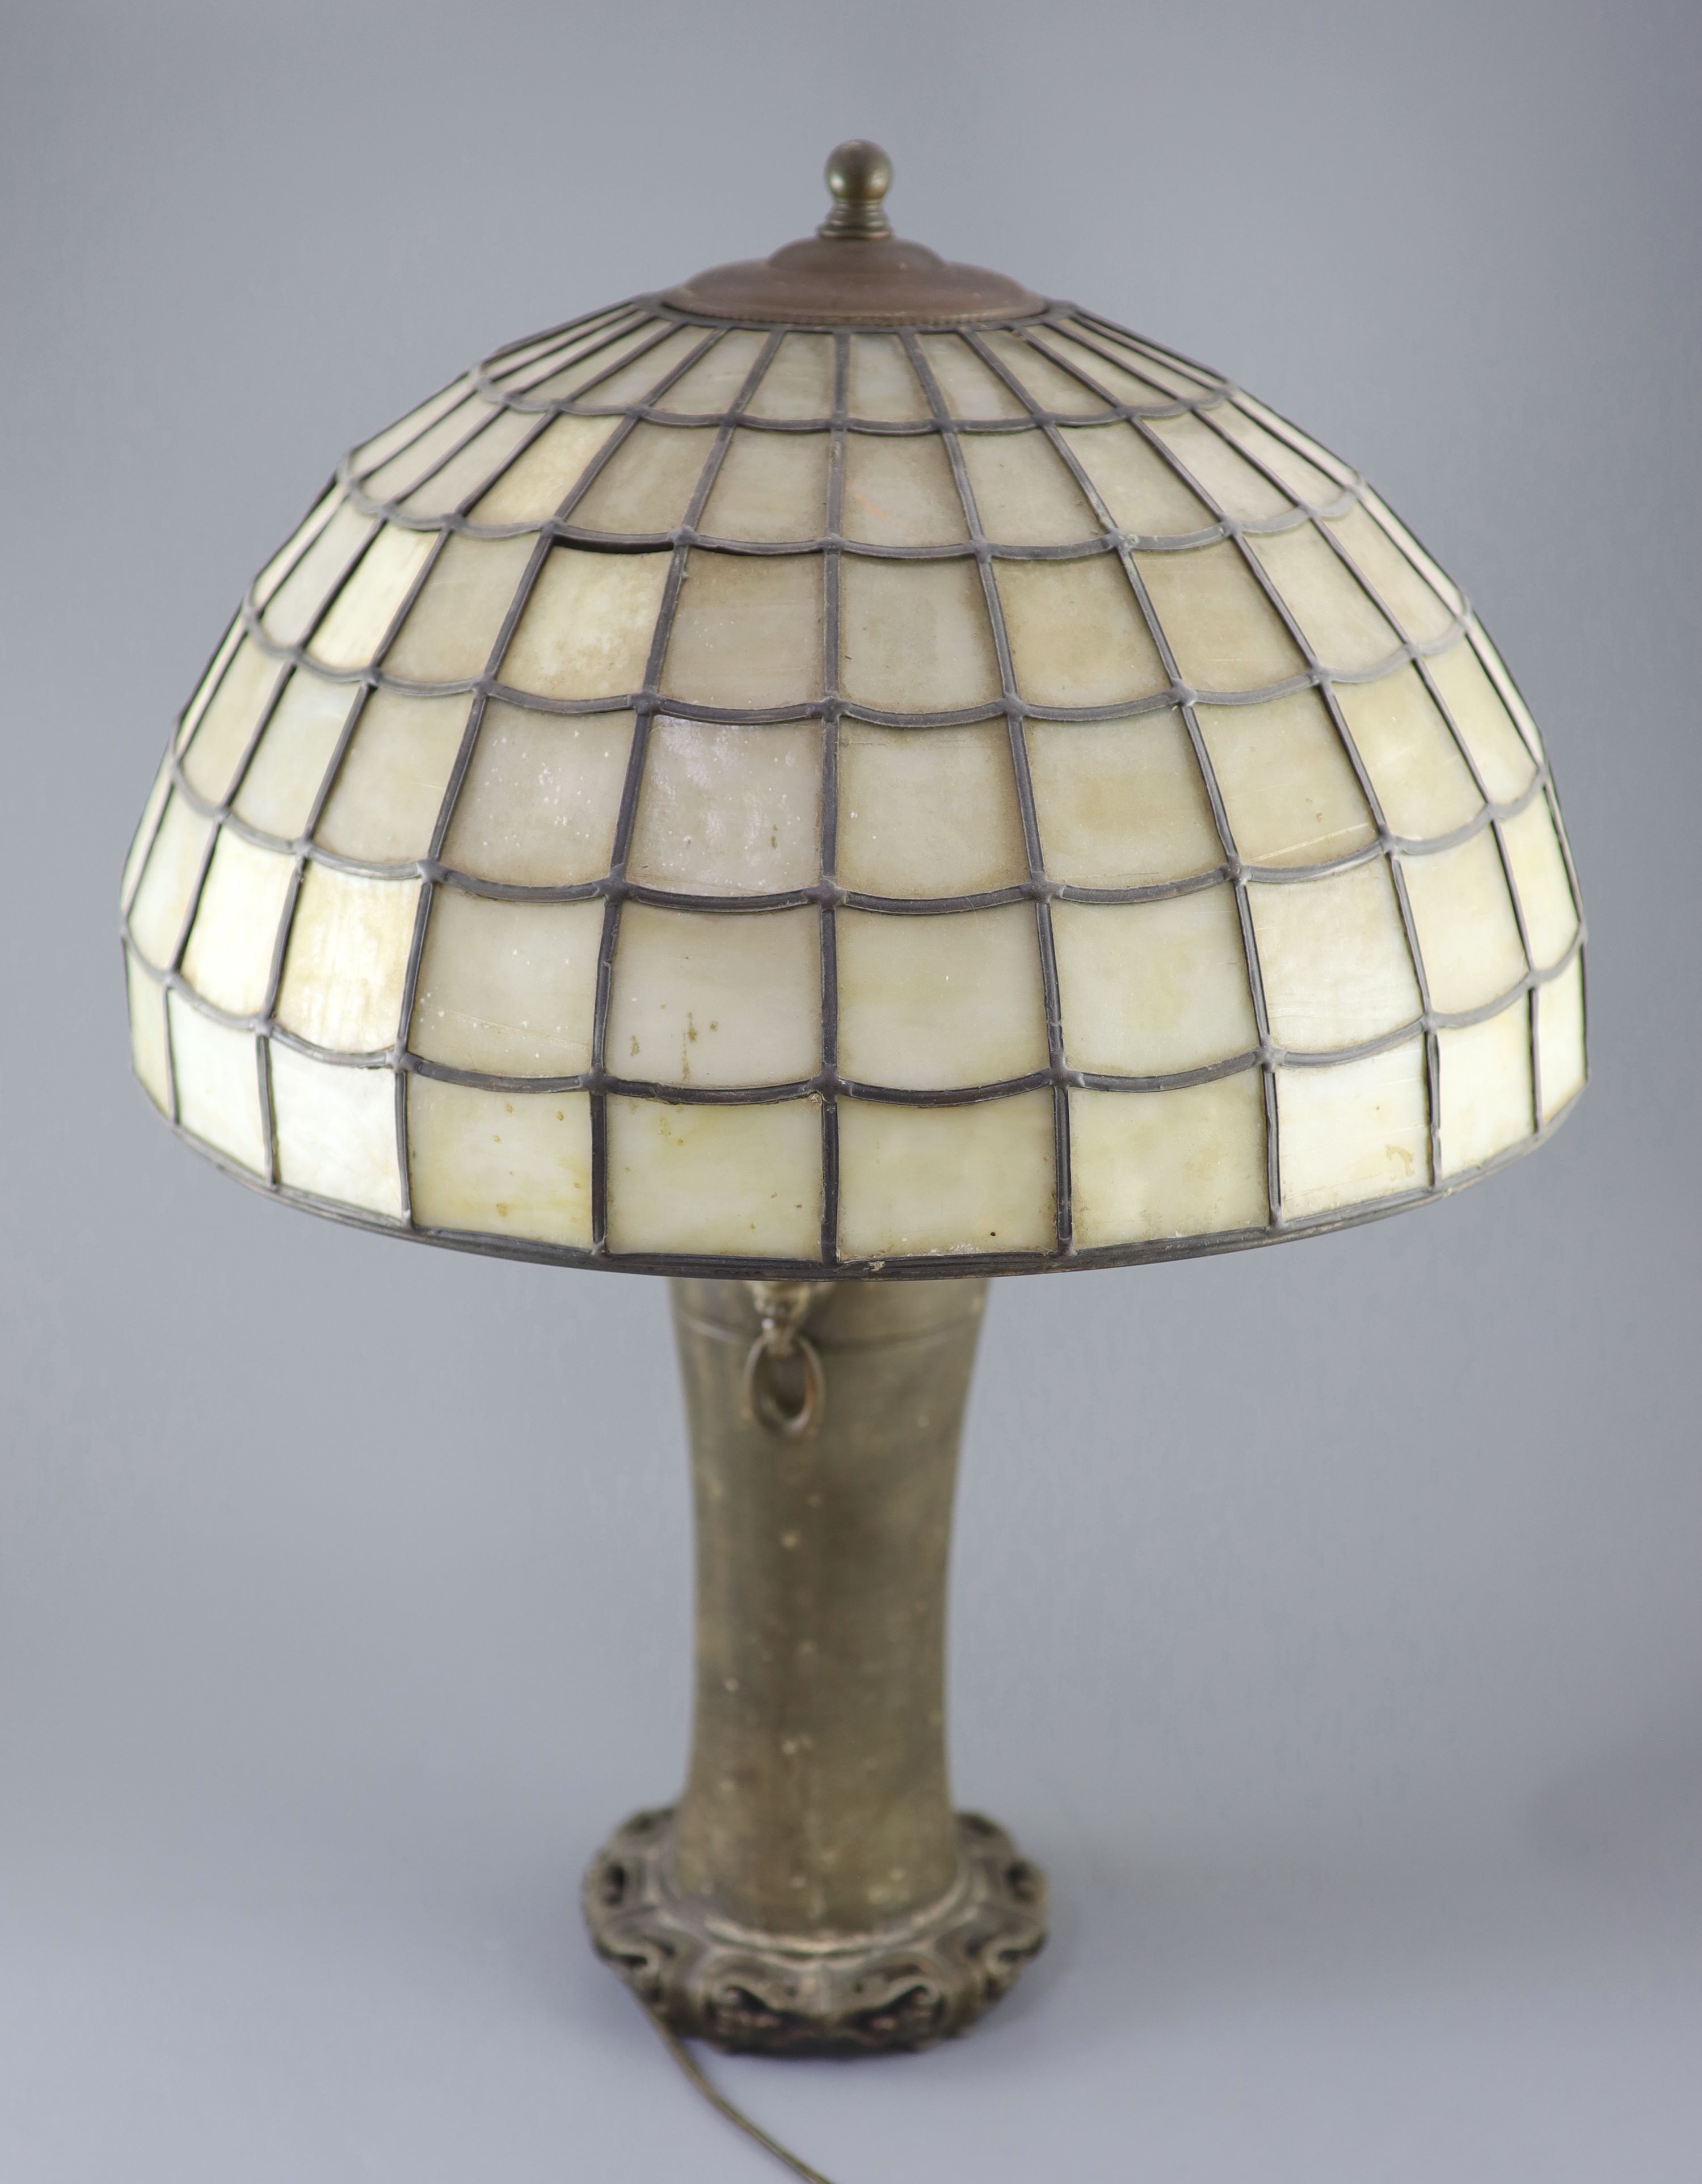 An early 20th century Tiffany style bronze table lamp, by Handel, diameter 20.1in. height 25in.